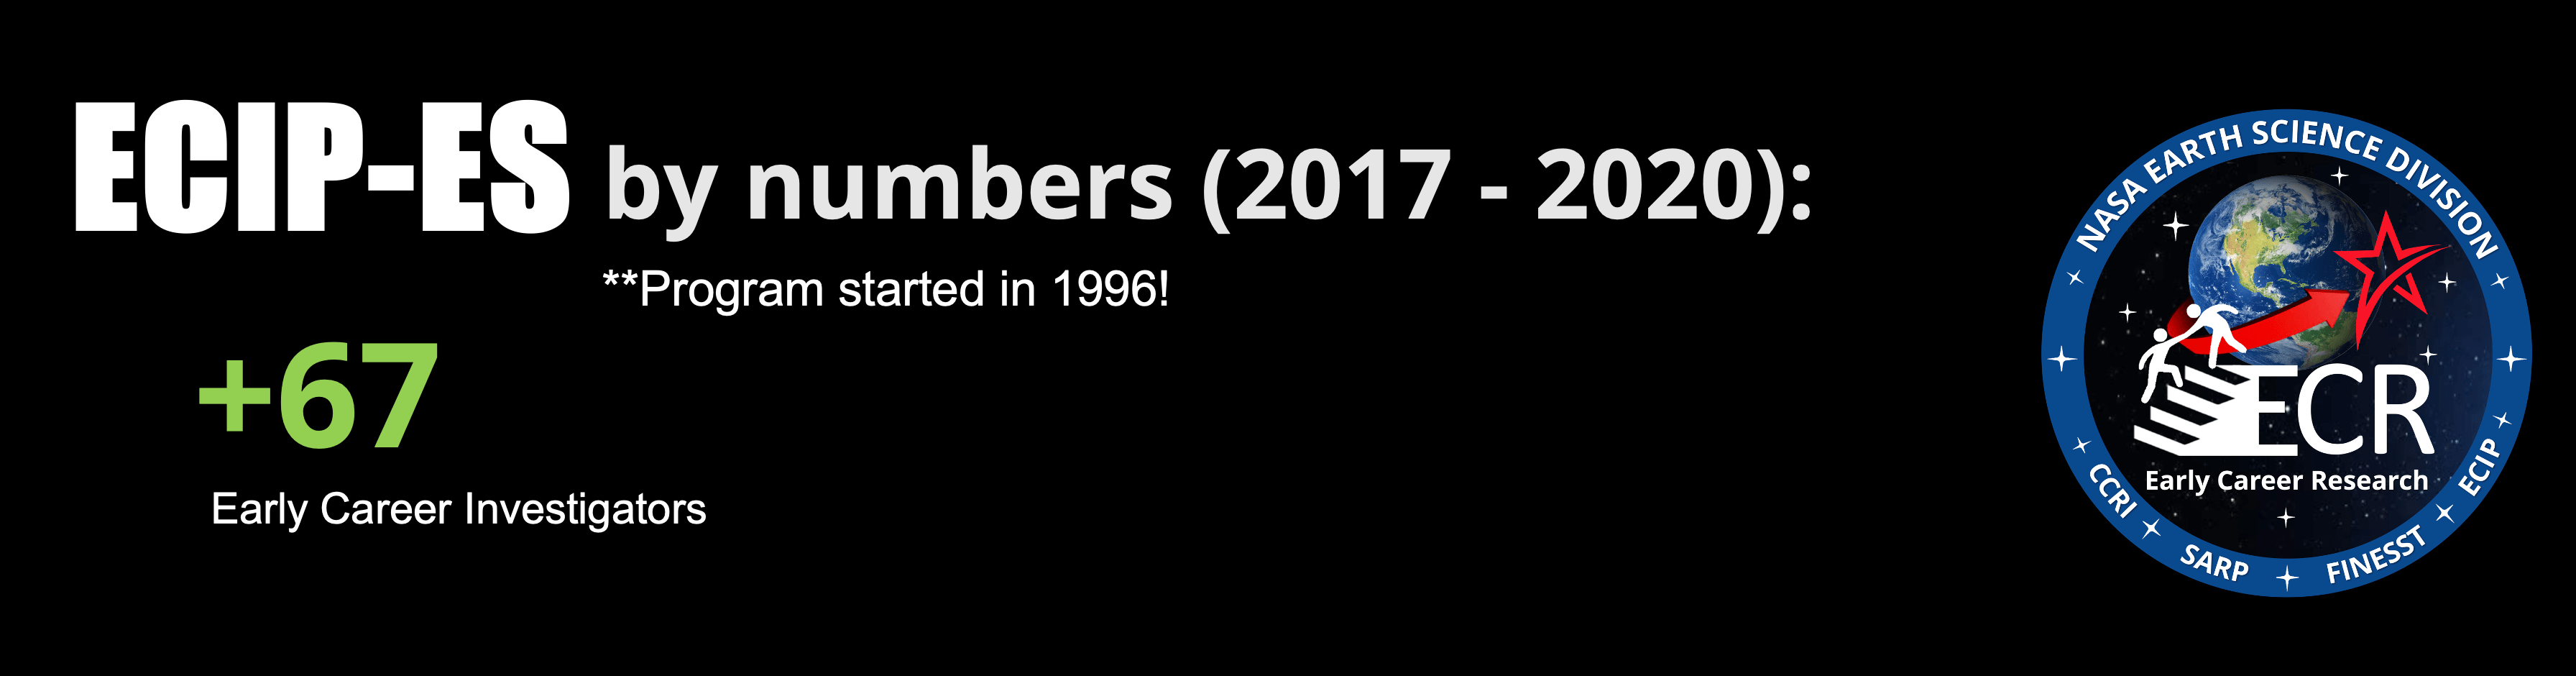 ECIP by the numbers, from 2017-2023, includes more than 67 early career investigators. The numbers are on a black background with the ECR graphic to the right.